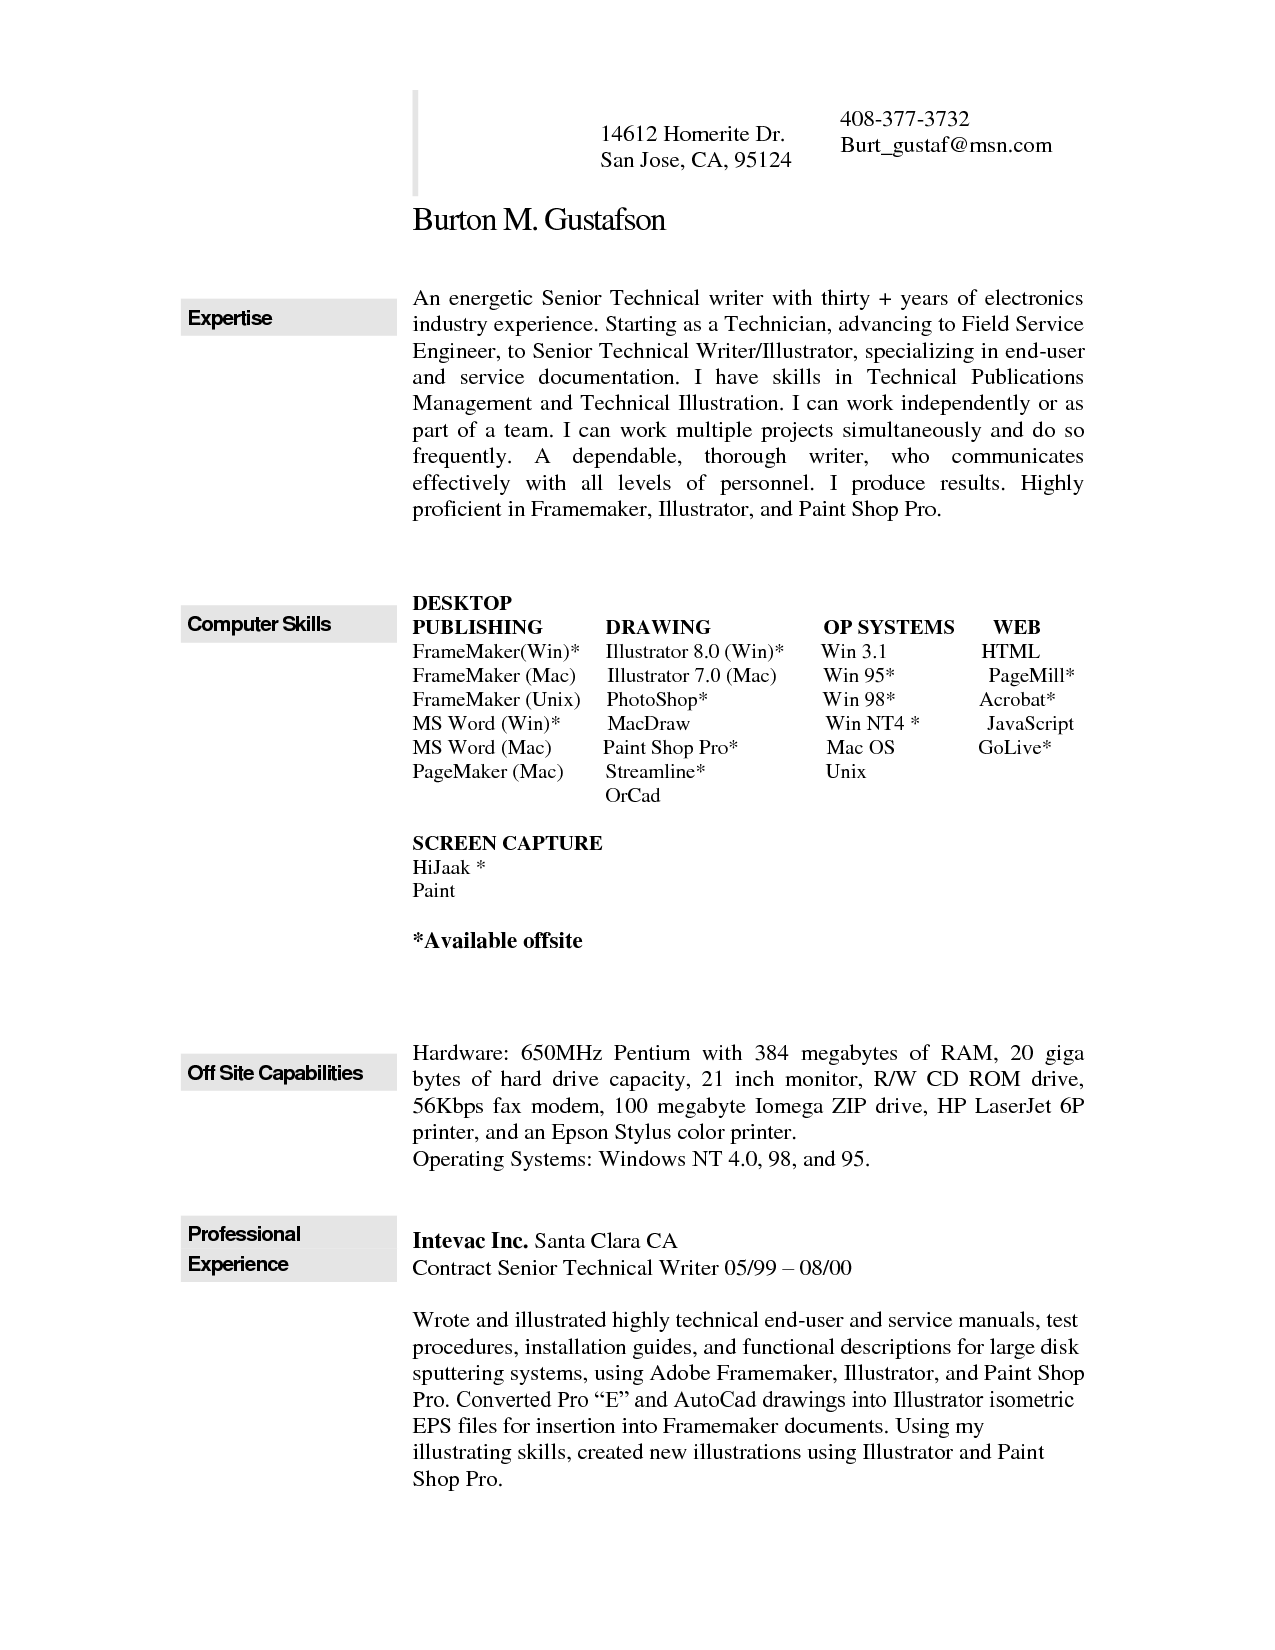 Resume Template Word Mac from yellowlogic.weebly.com